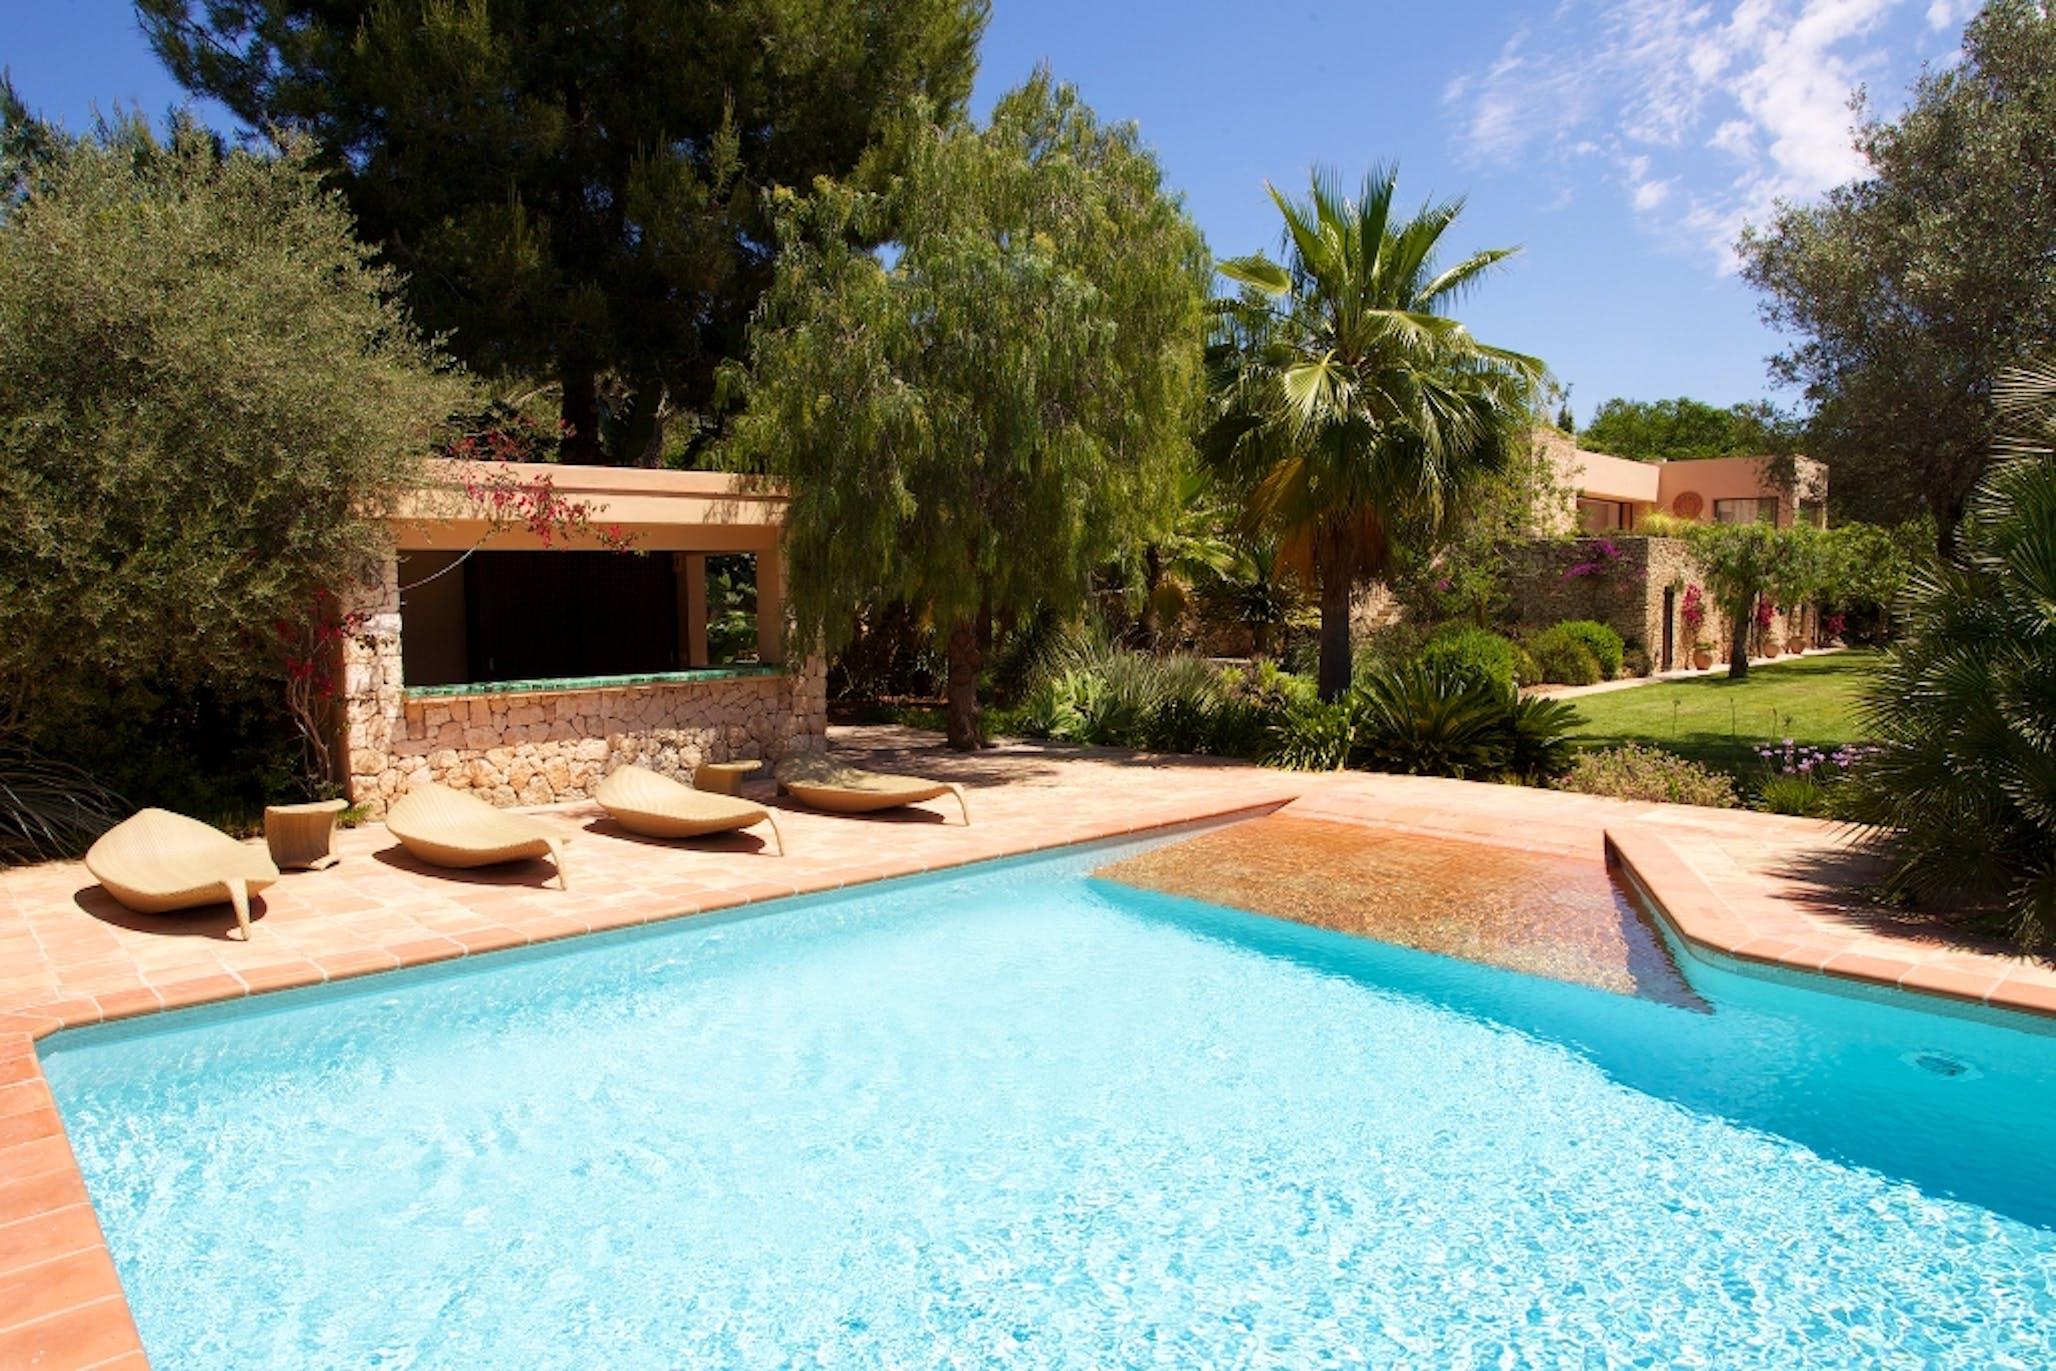 Property Image 2 - Luxury villa in beautifully landscaped gardens close to Ibiza Town